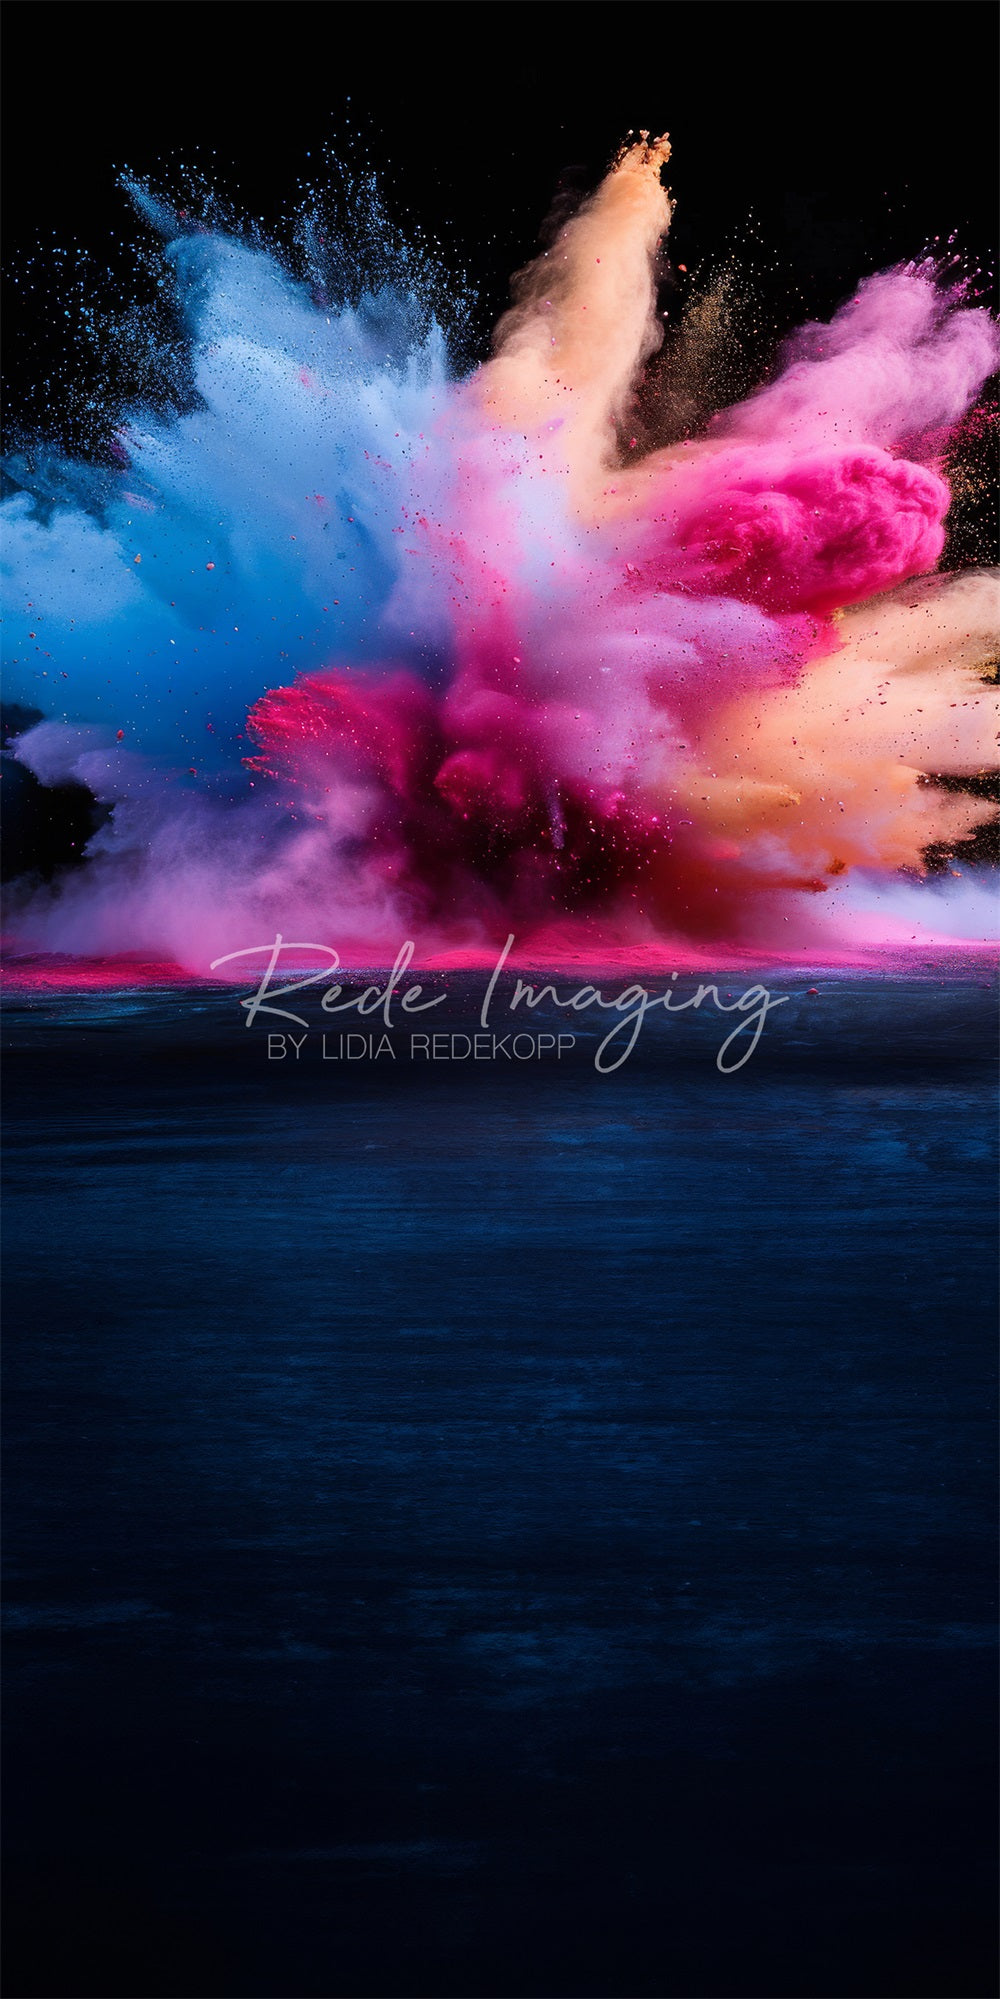 Kate Sweep Cool Colorful Burst of Powder Backdrop Designed by Lidia Redekopp